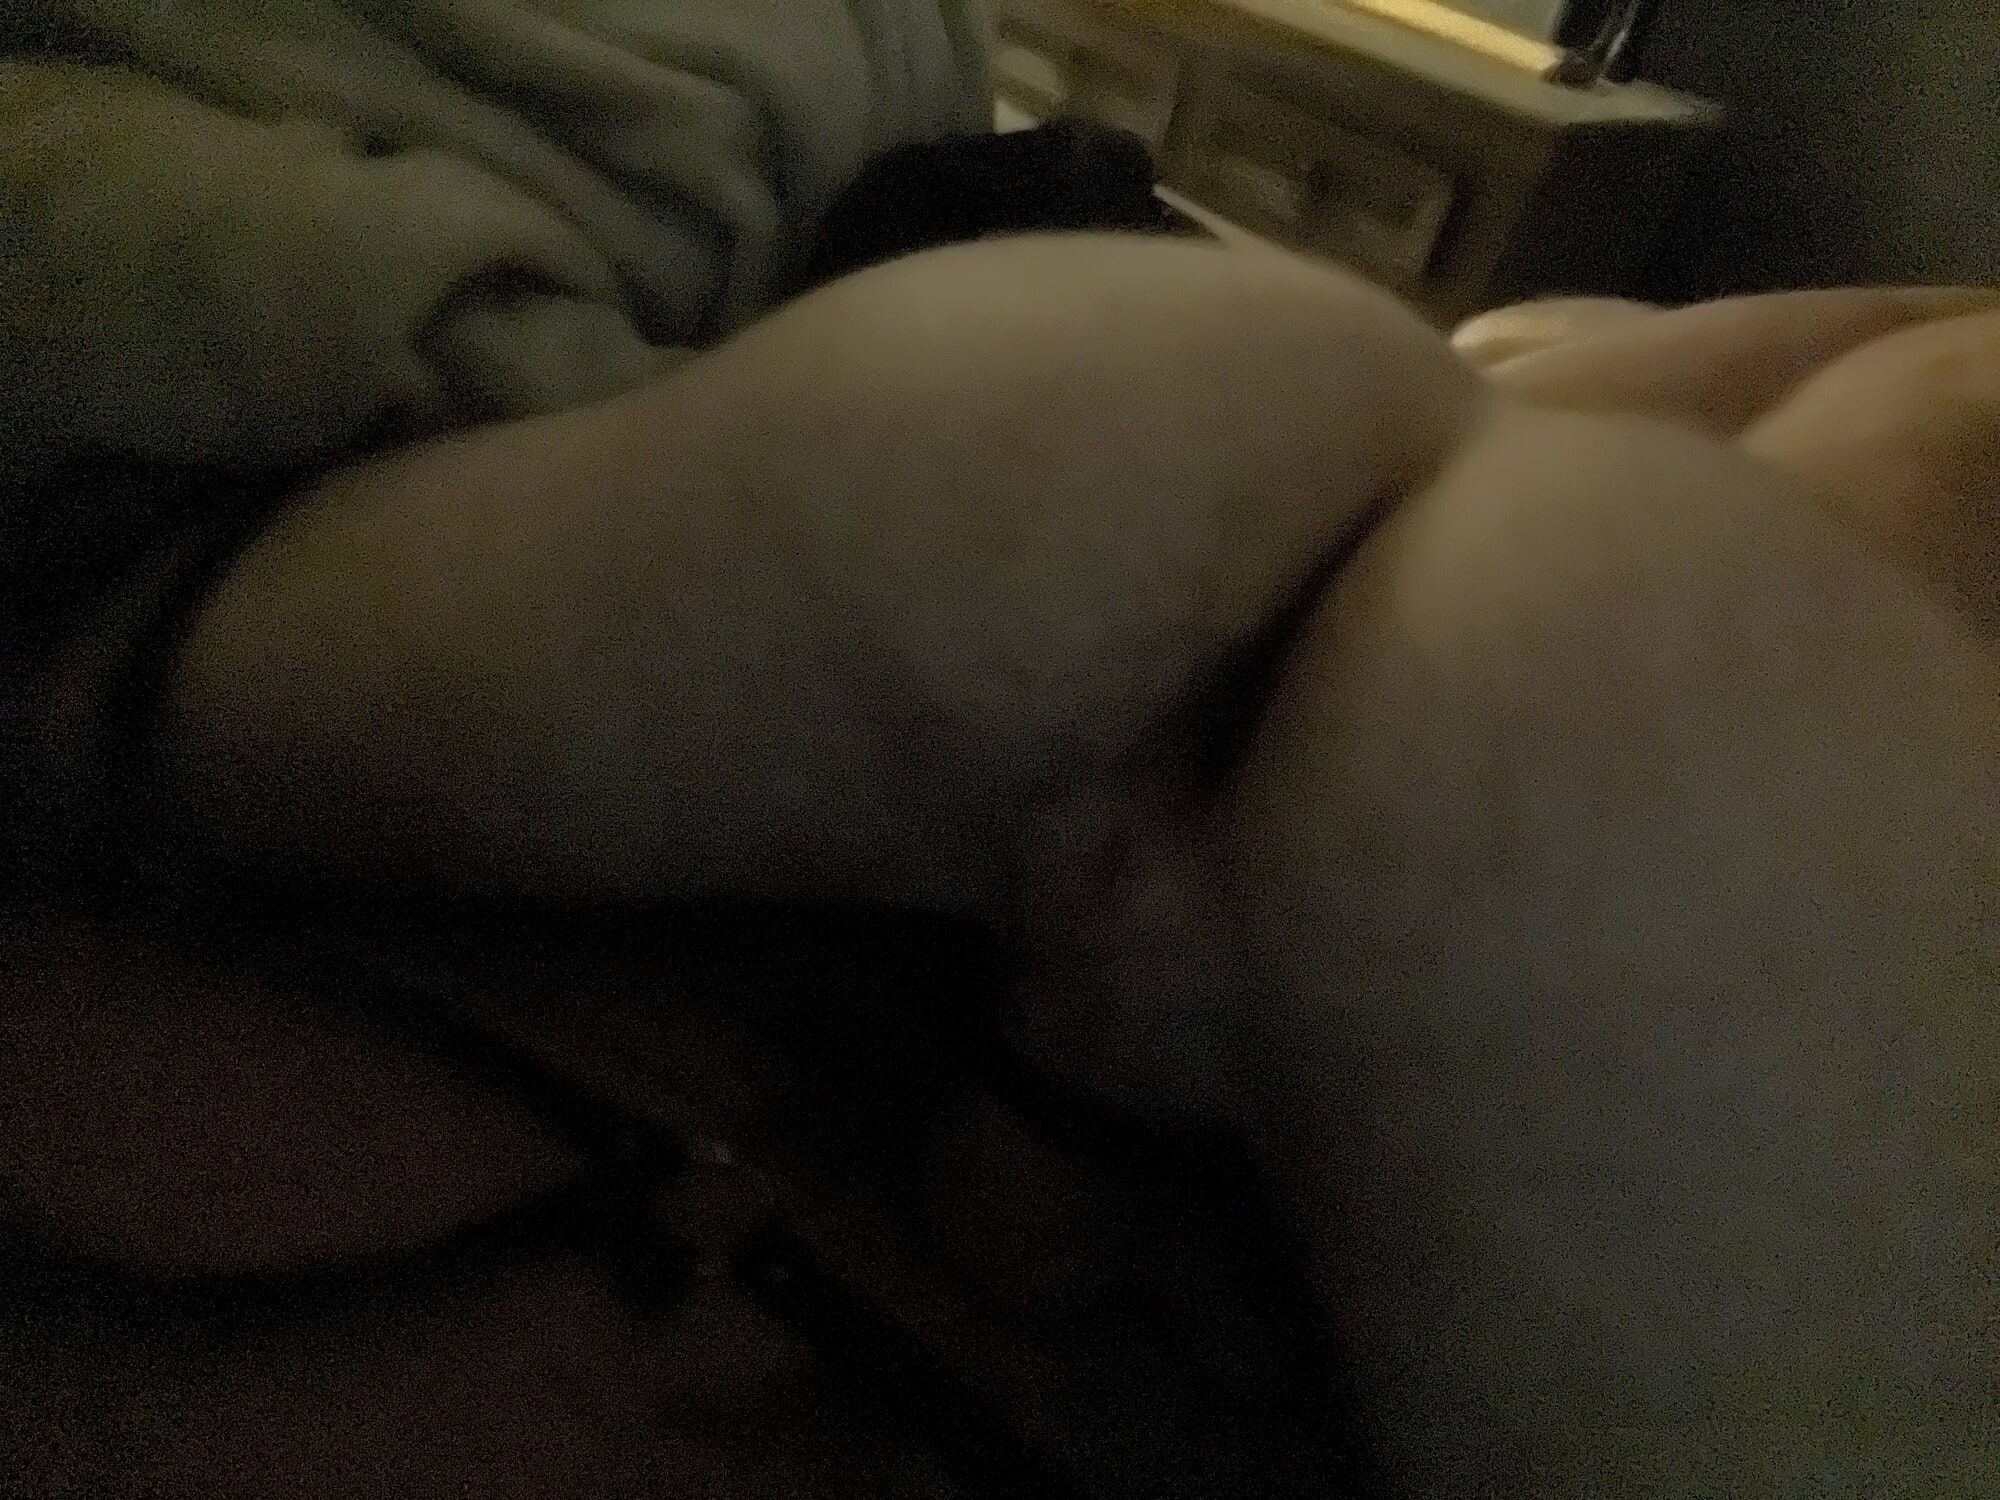 Some fun shots of me cum see #15